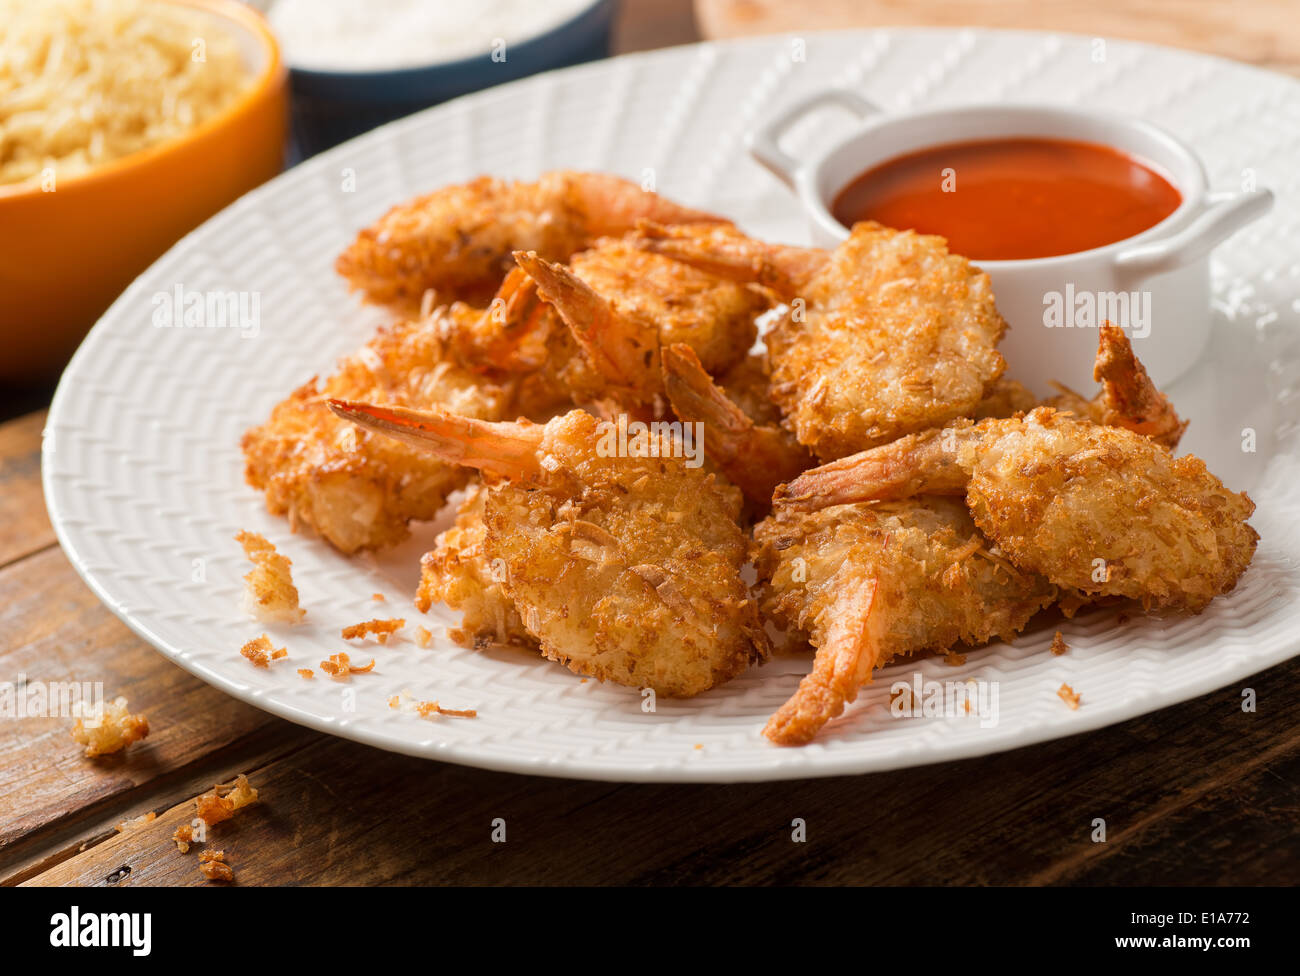 Delicious golden breaded and deep fried coconut shrimp with dipping sauce. Stock Photo